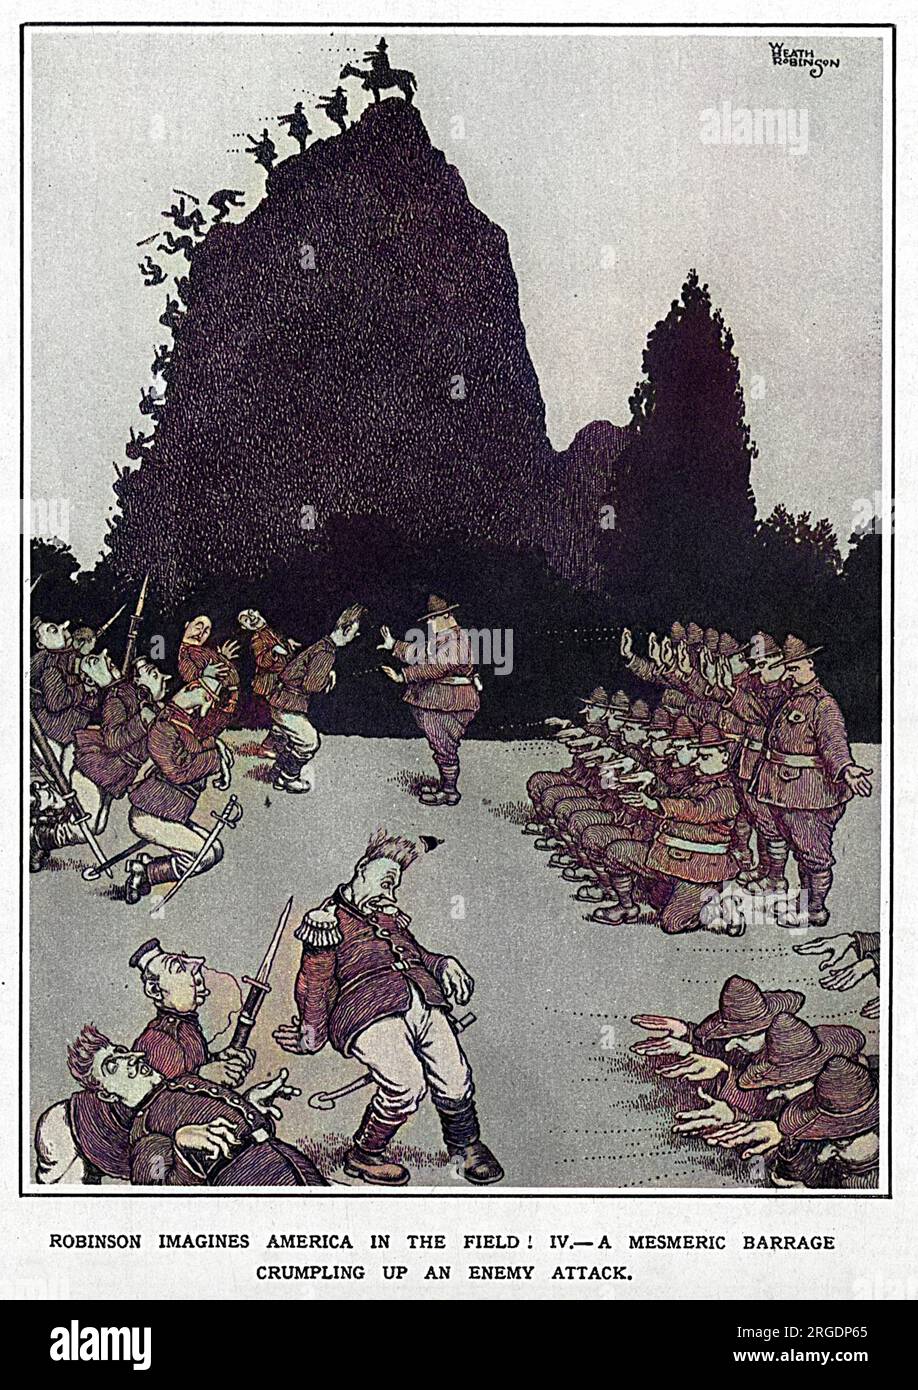 War Inventions Not Needed Now!  William Heath Robinson imagines America in the field!  4. A mesmeric barrage crumpling up an enemy attack. Stock Photo